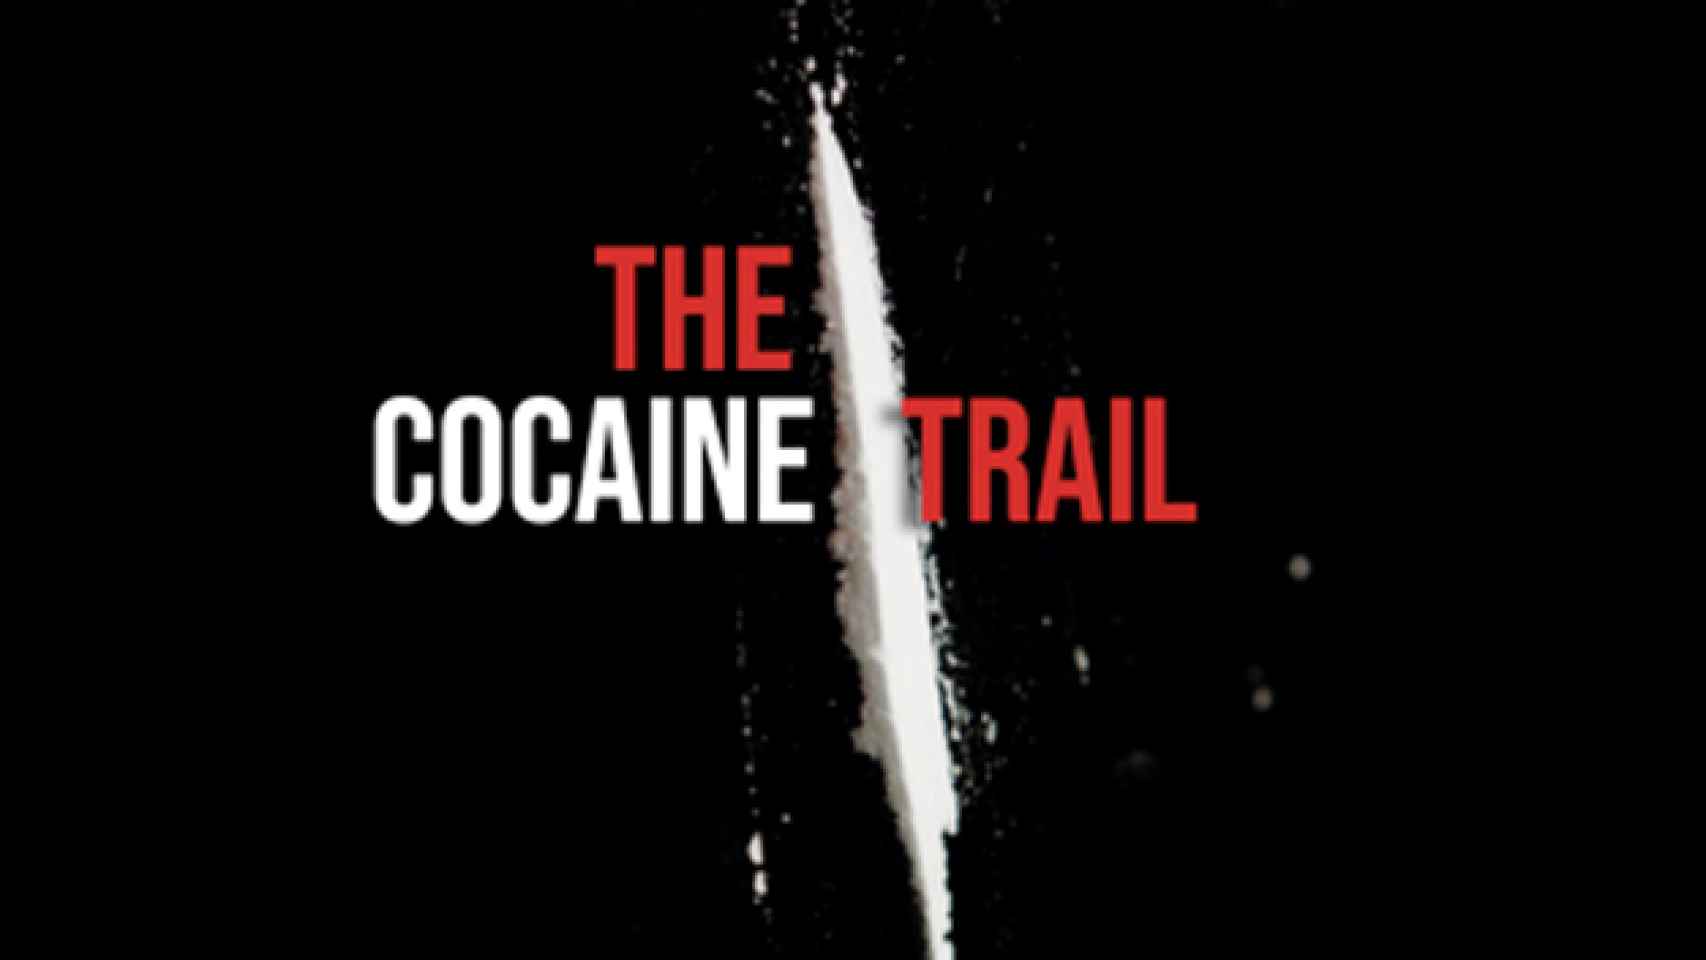 The cocaine trail